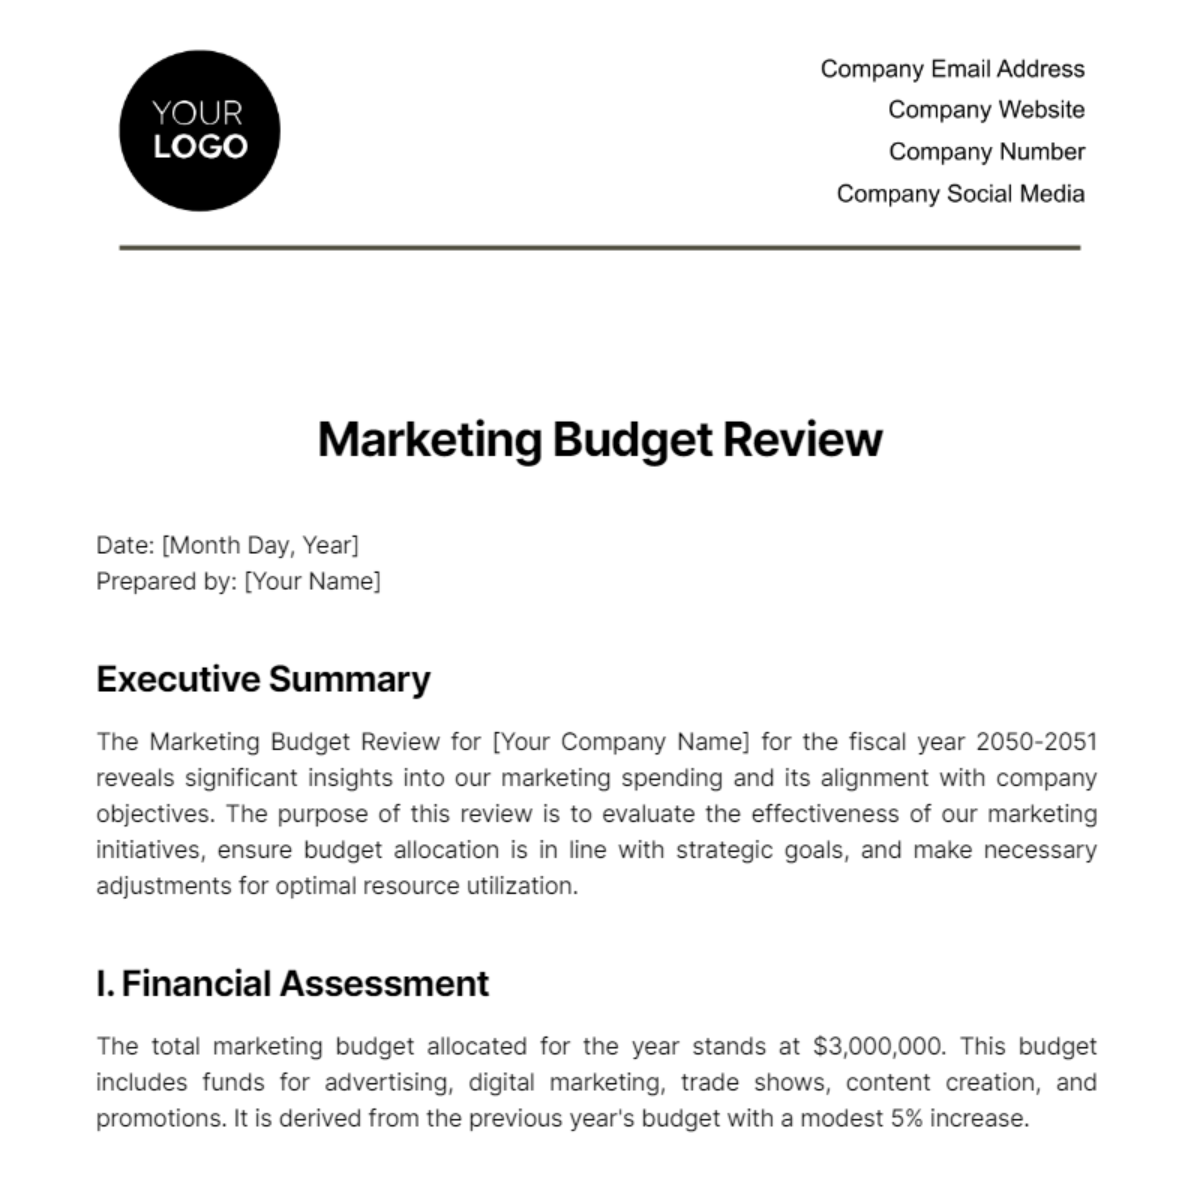 Free Marketing Budget Review Template